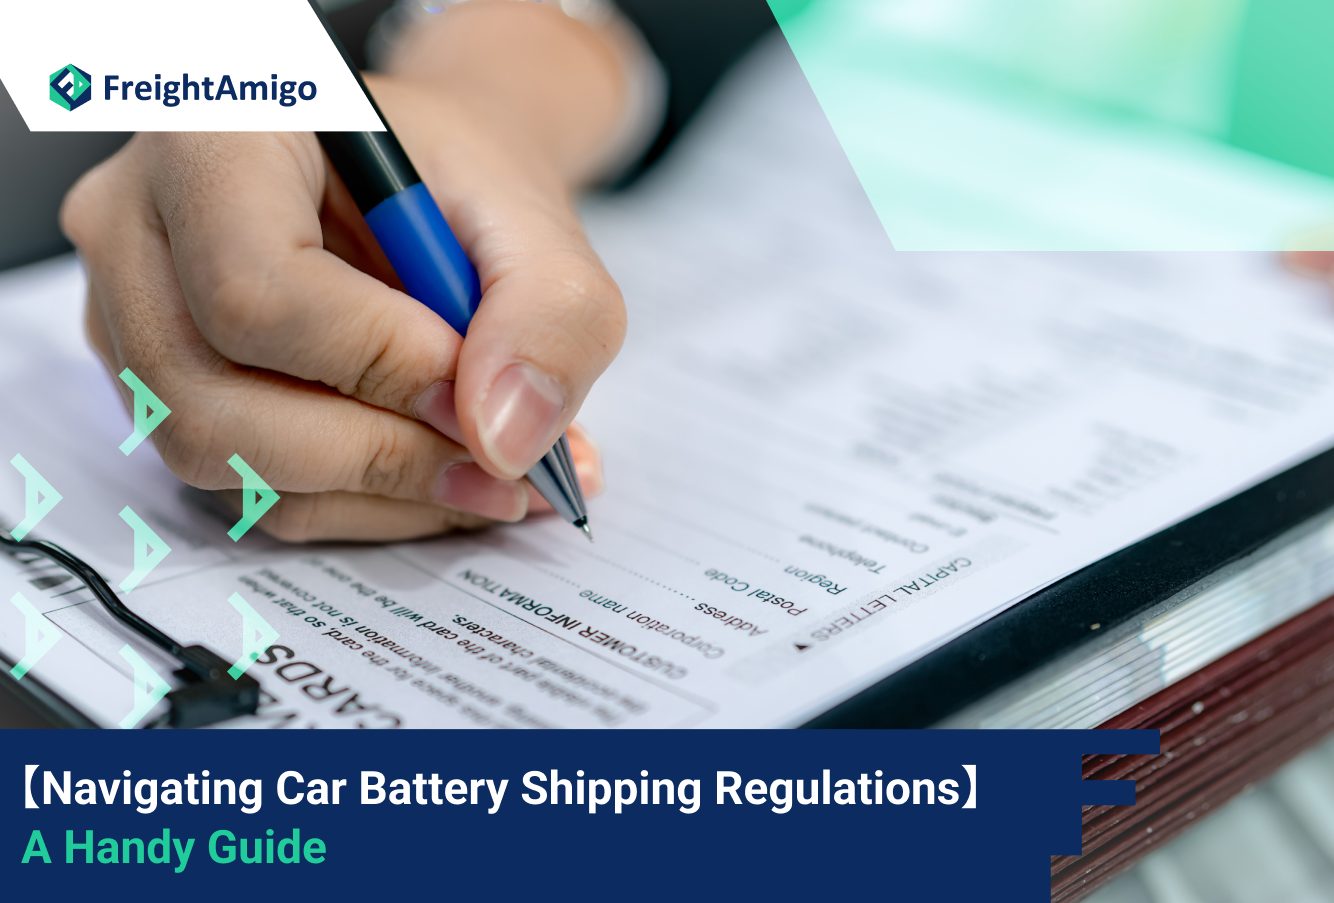 A Handy Guide in Navigating Car Battery Shipping Regulations